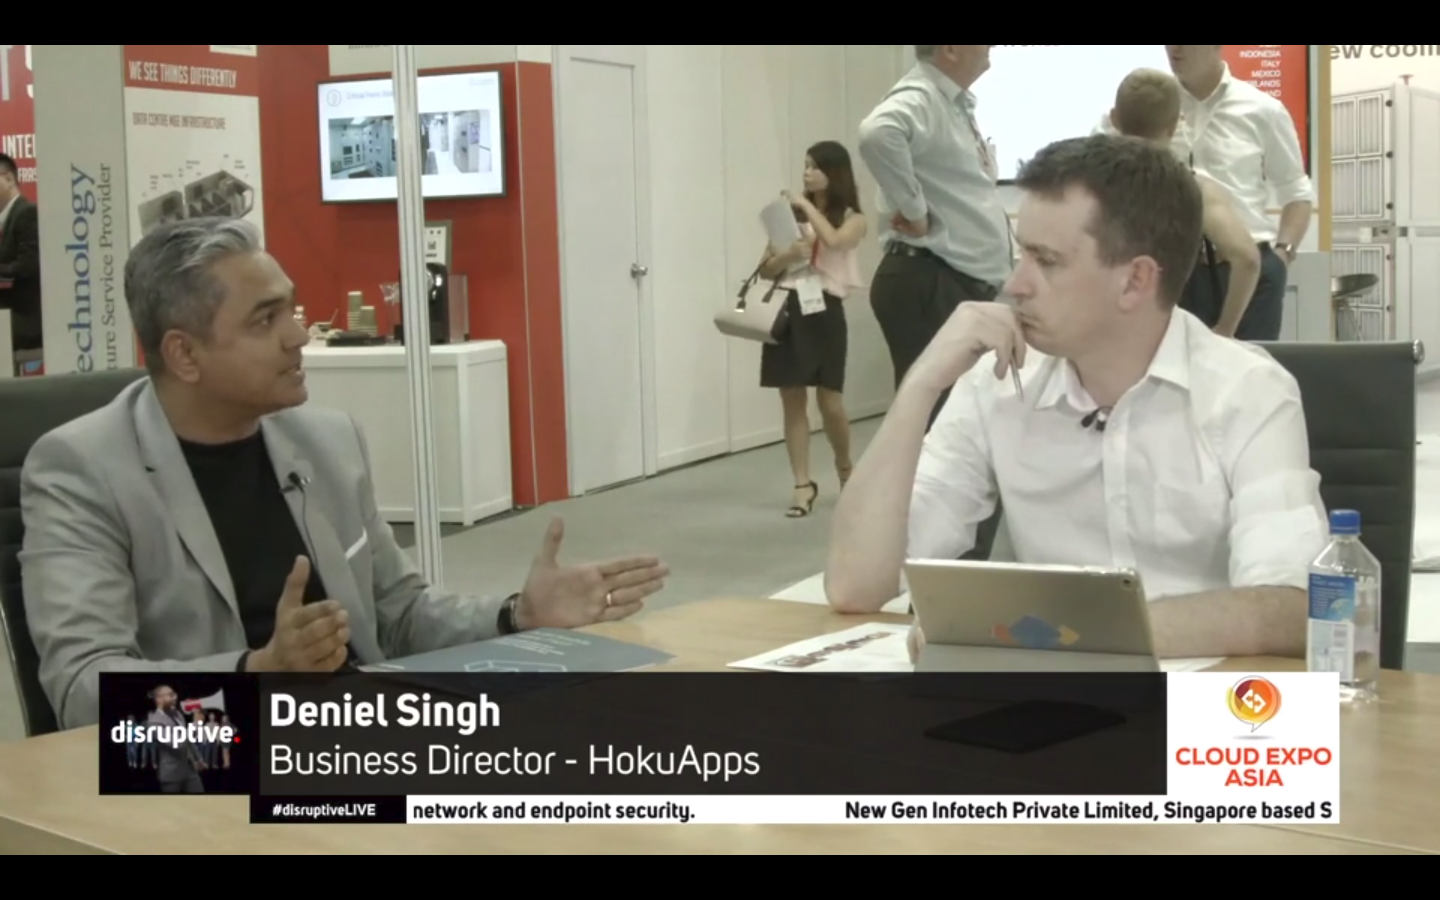 Deniel Singh, Business Director-HokuApps, speaks at Cloud Expo Asia 2018, Singapore